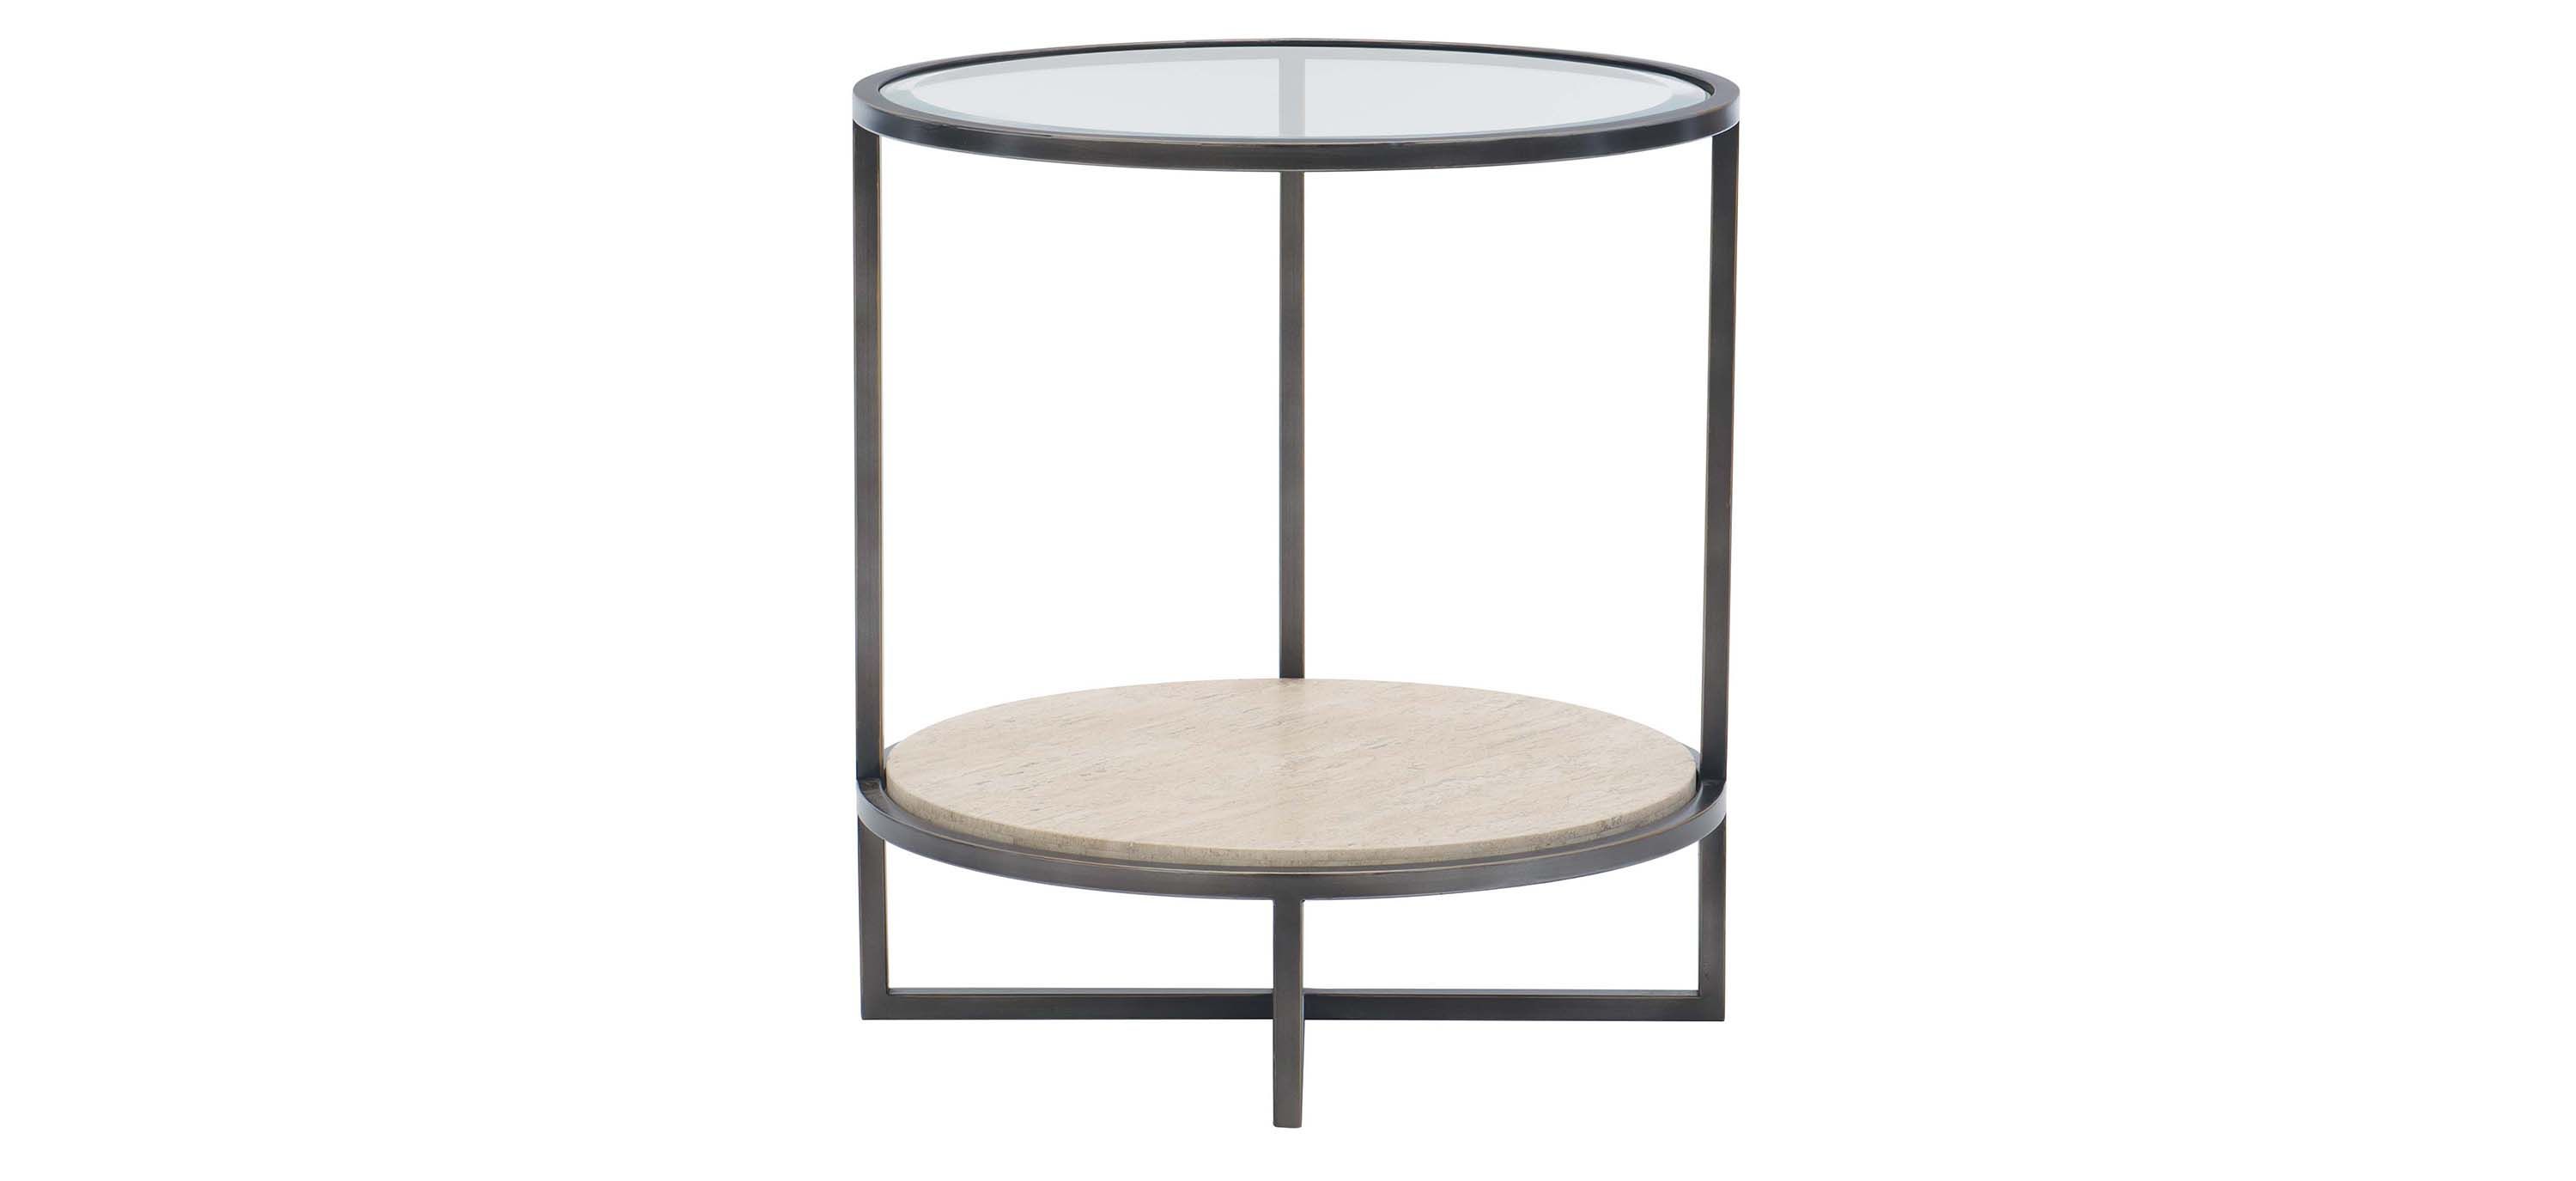 Harlow Round Chairside Table